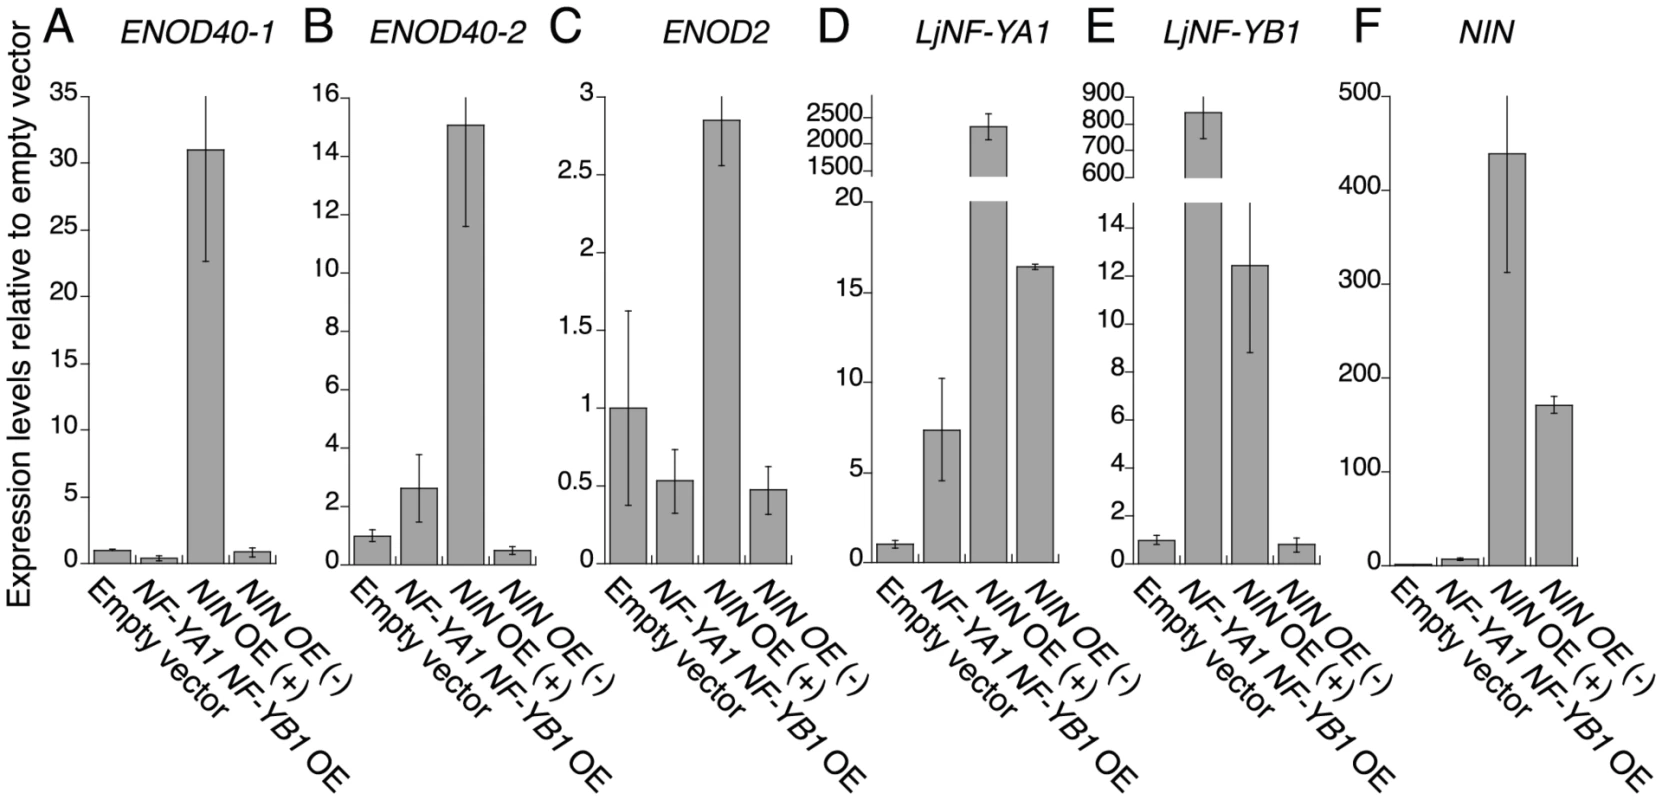 RT–PCR analysis of the expression of early nodulin genes and <i>LjNF-Y</i> subunit genes.